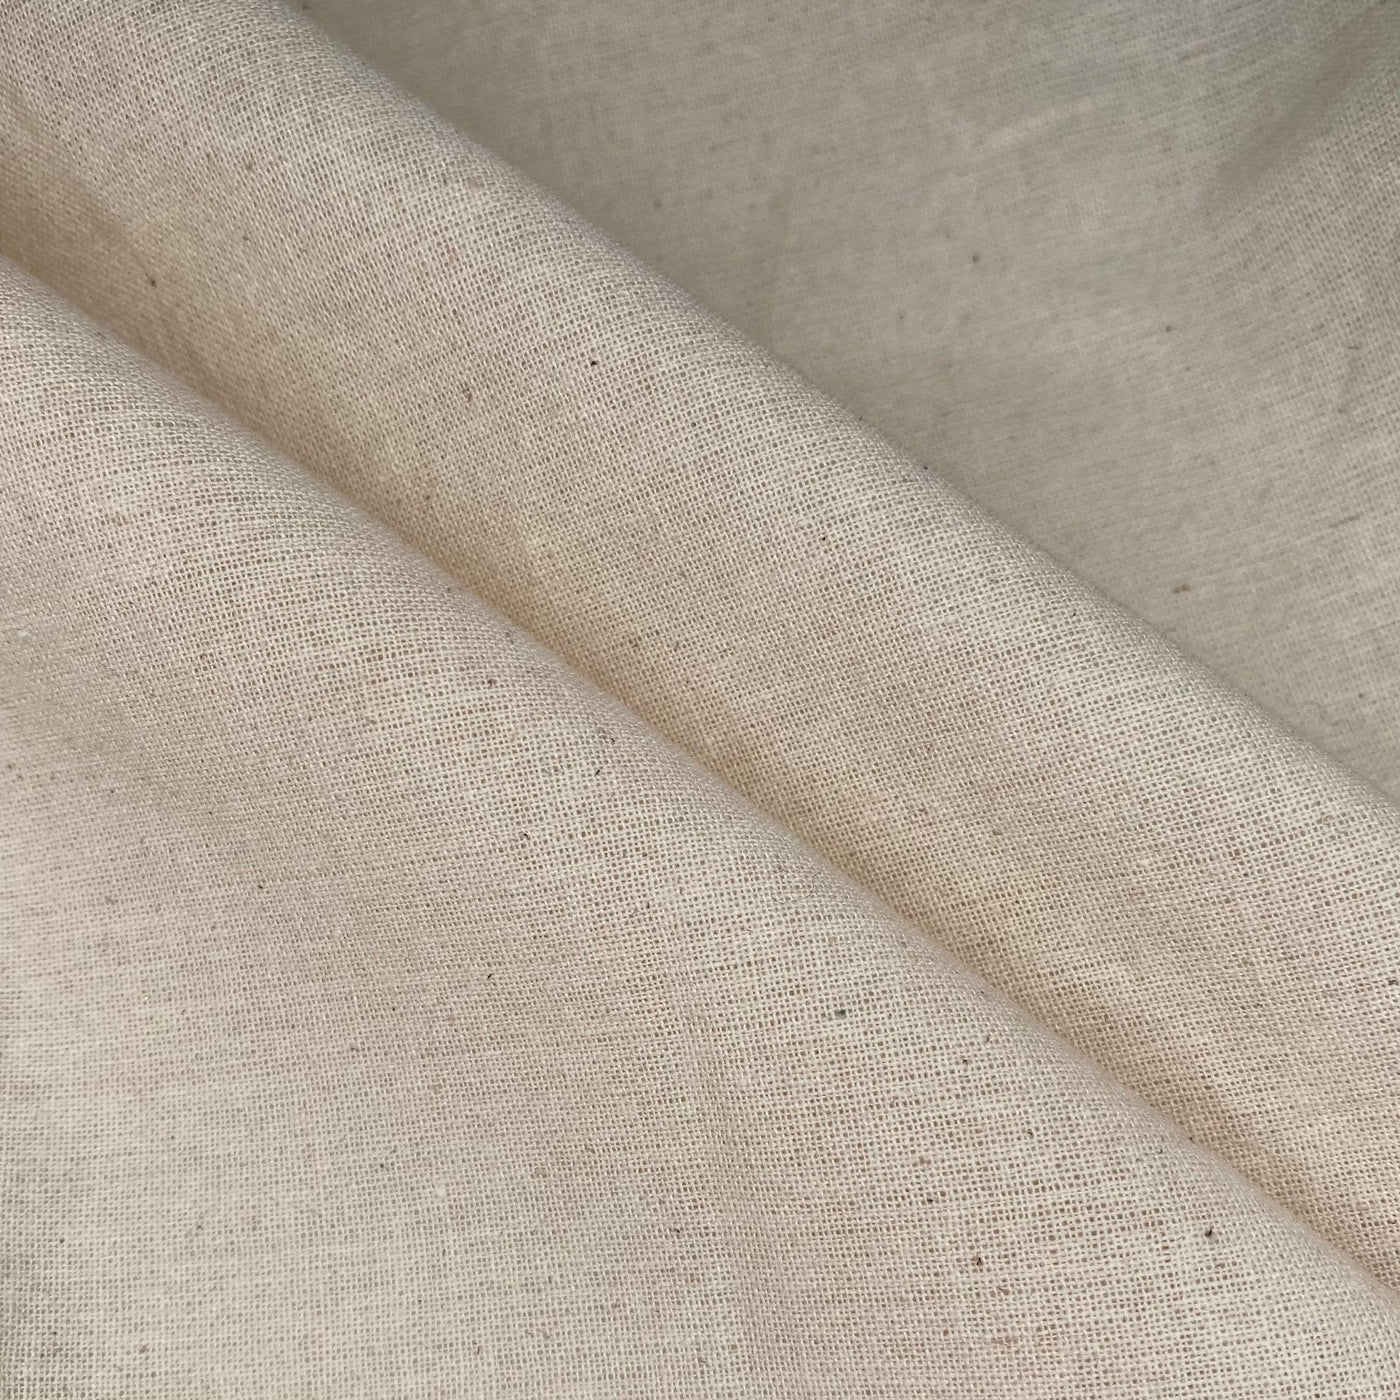 Natural Cotton Fabric Brushed Twill for Upholstery Slipcovers Home